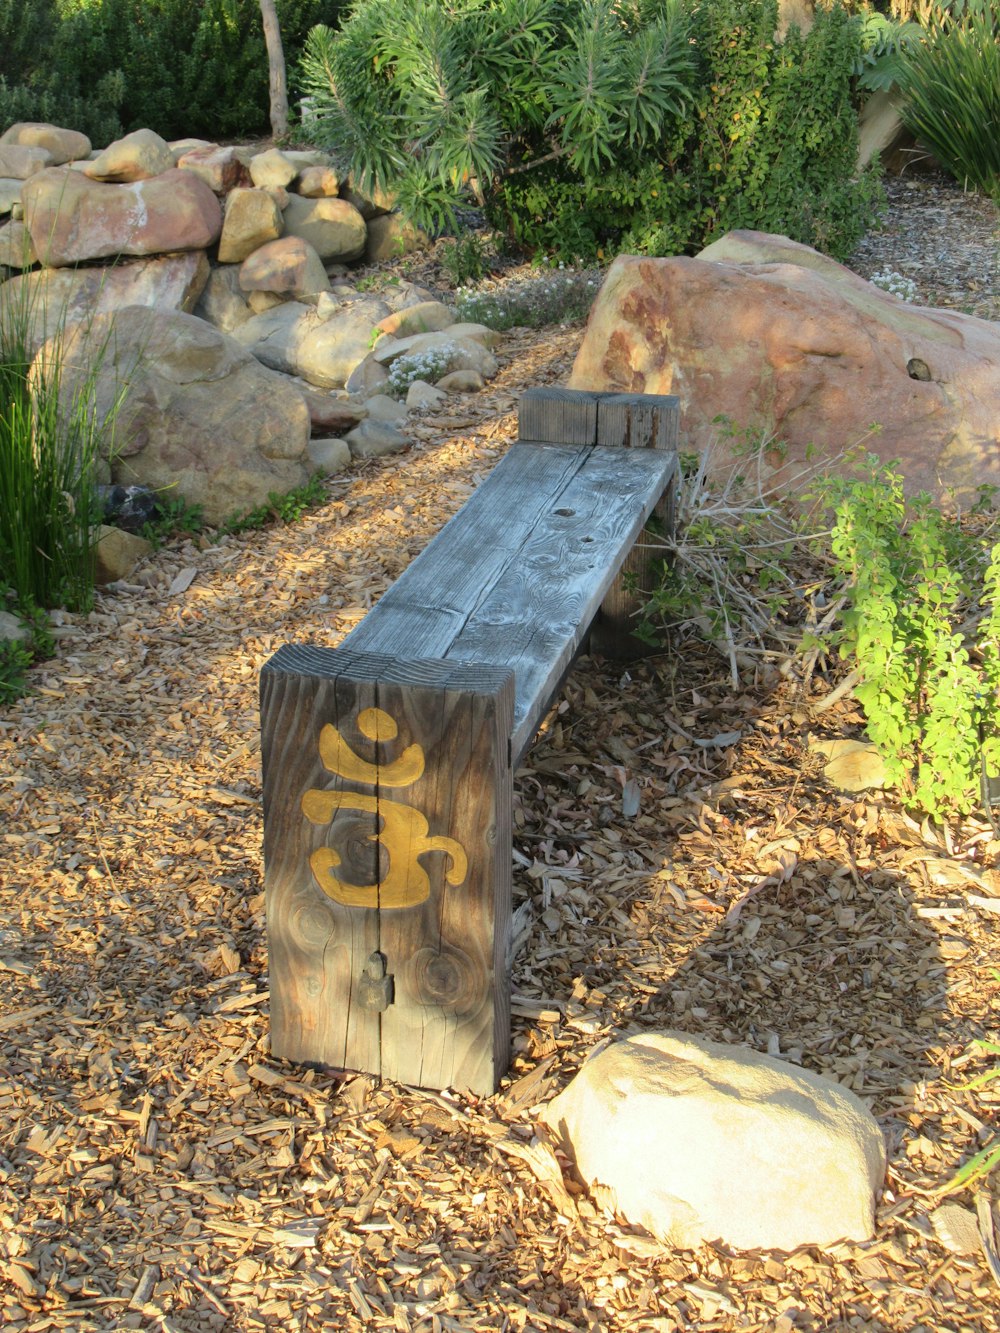 a wooden bench sitting in the middle of a garden